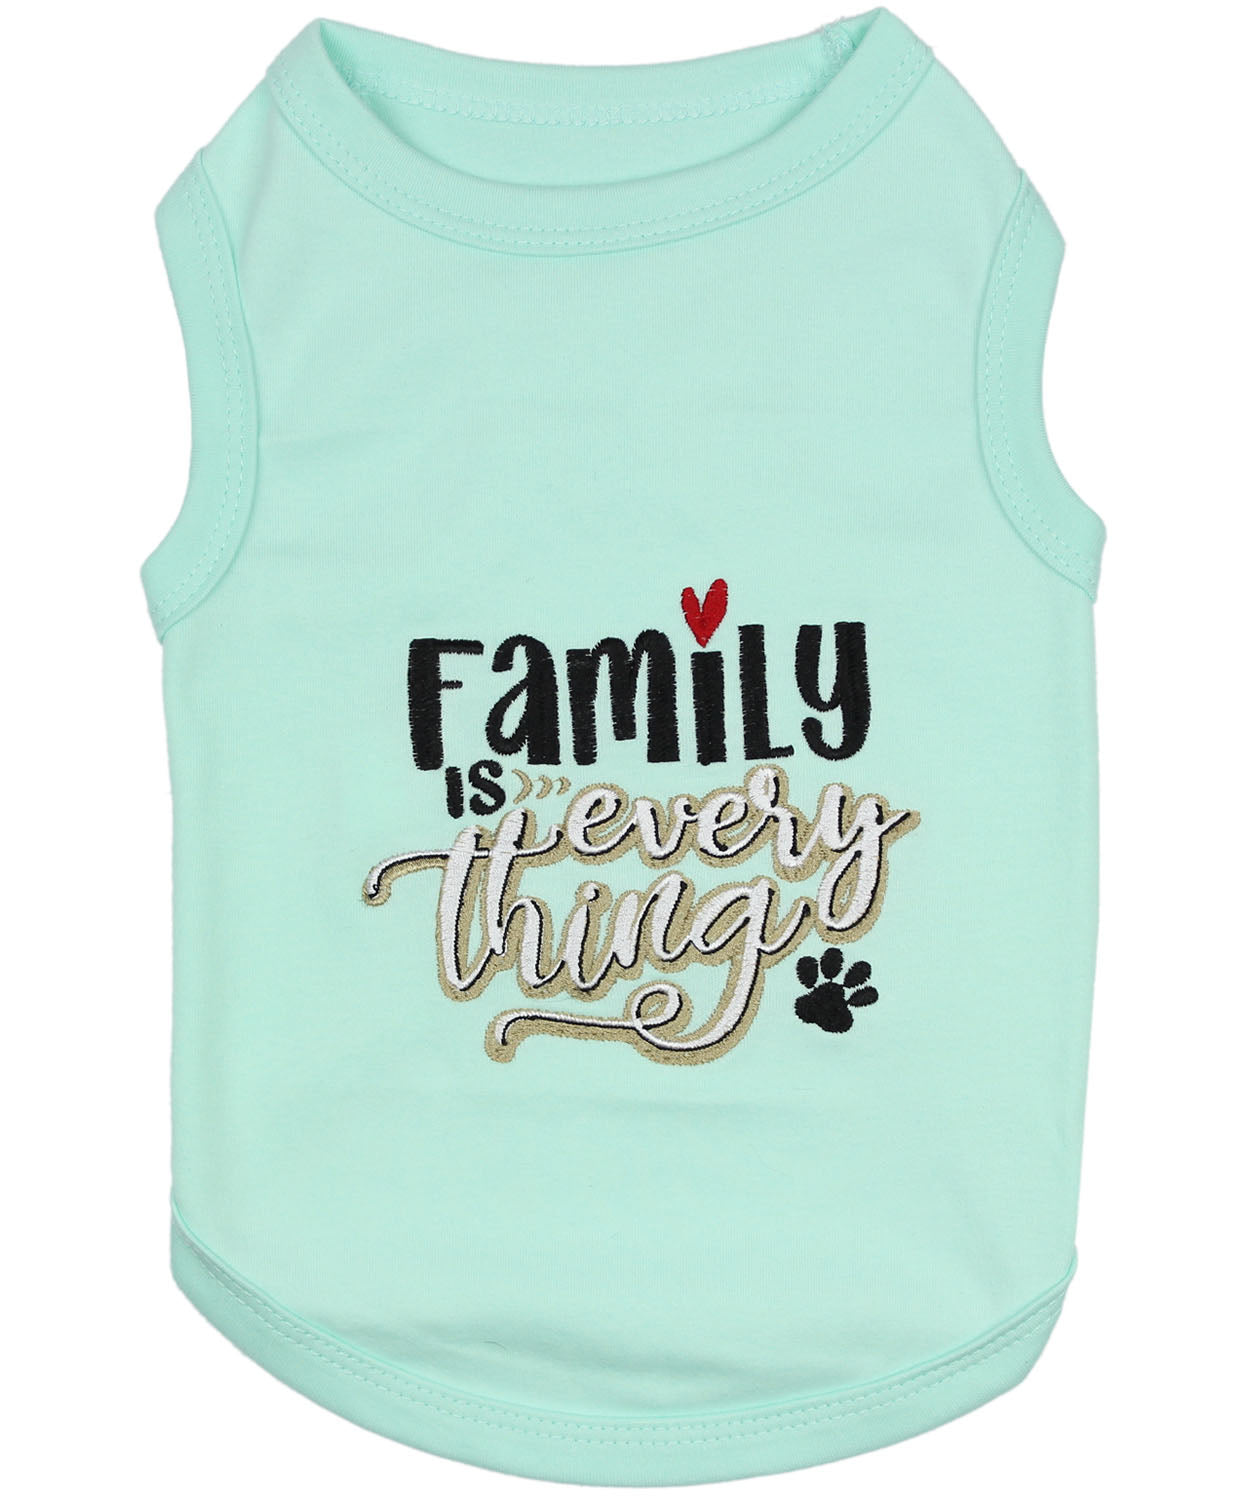 Family is Everything Pet T-Shirt